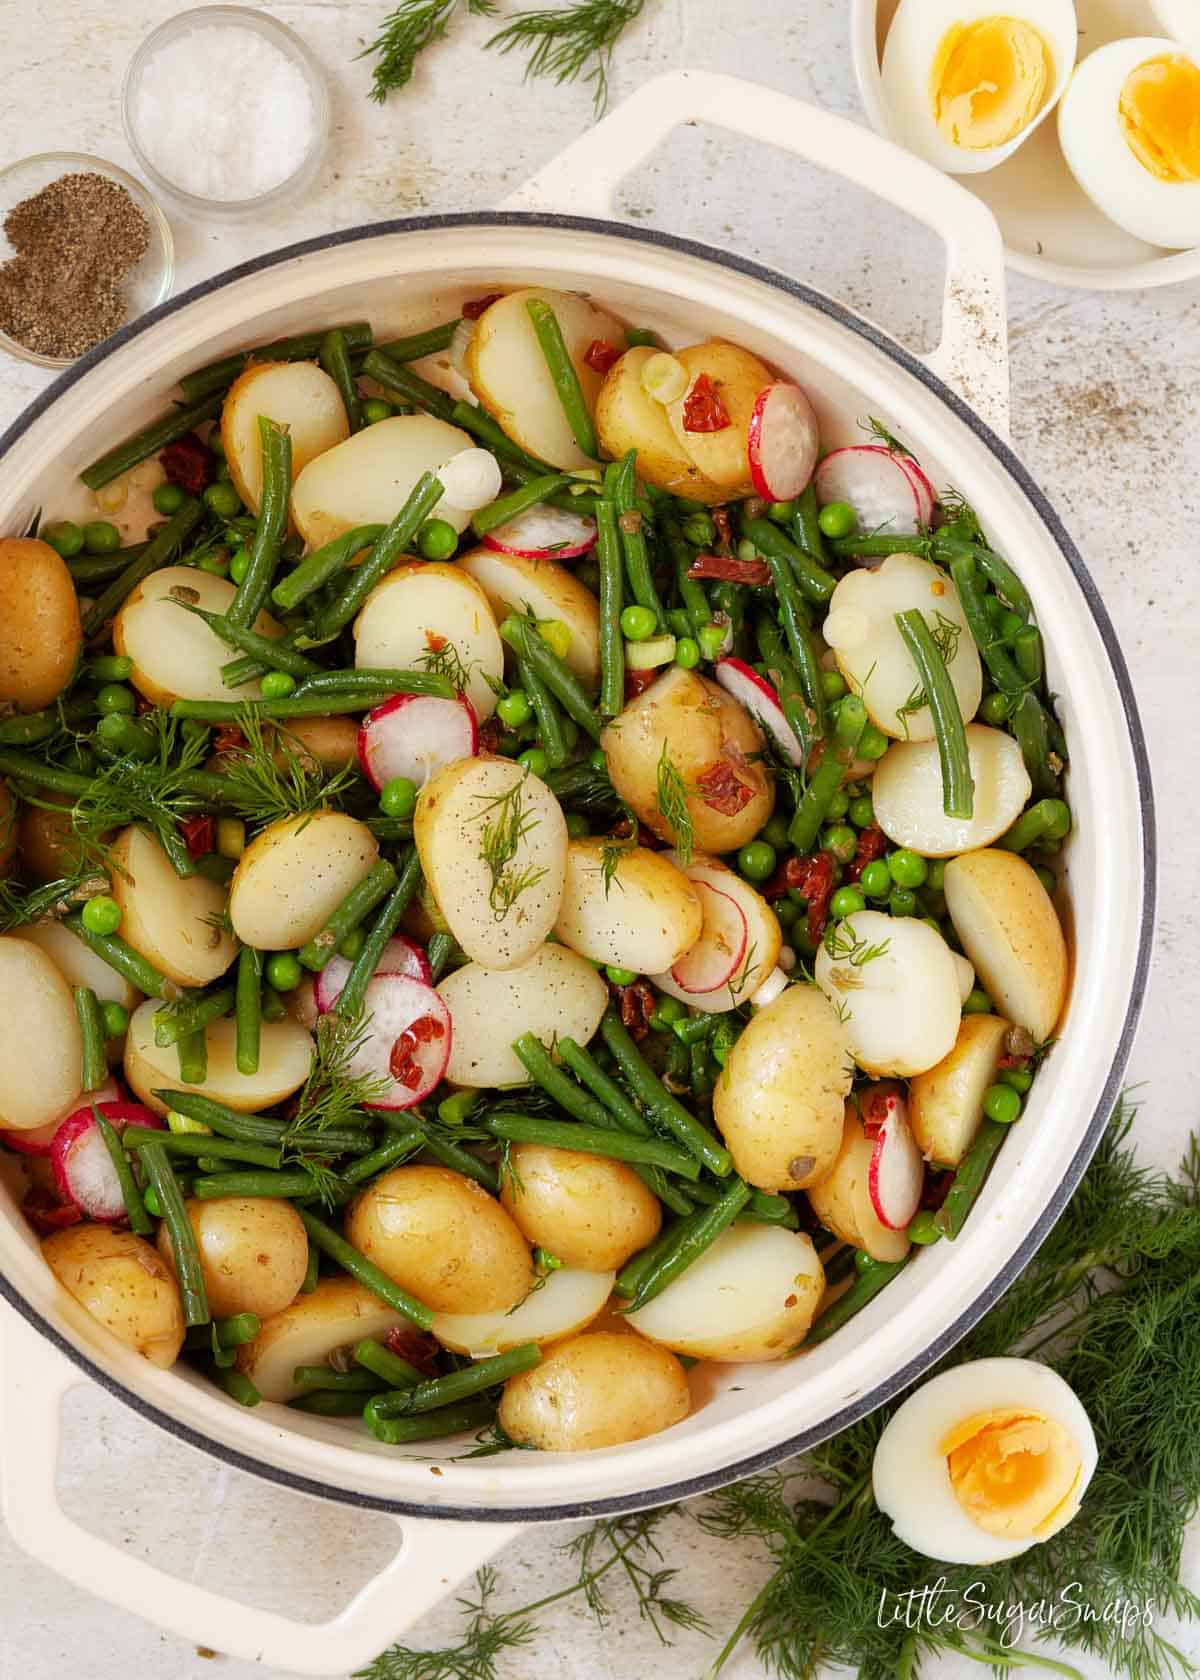 Potato salad and green vegetables with dill and sundried tomatoes